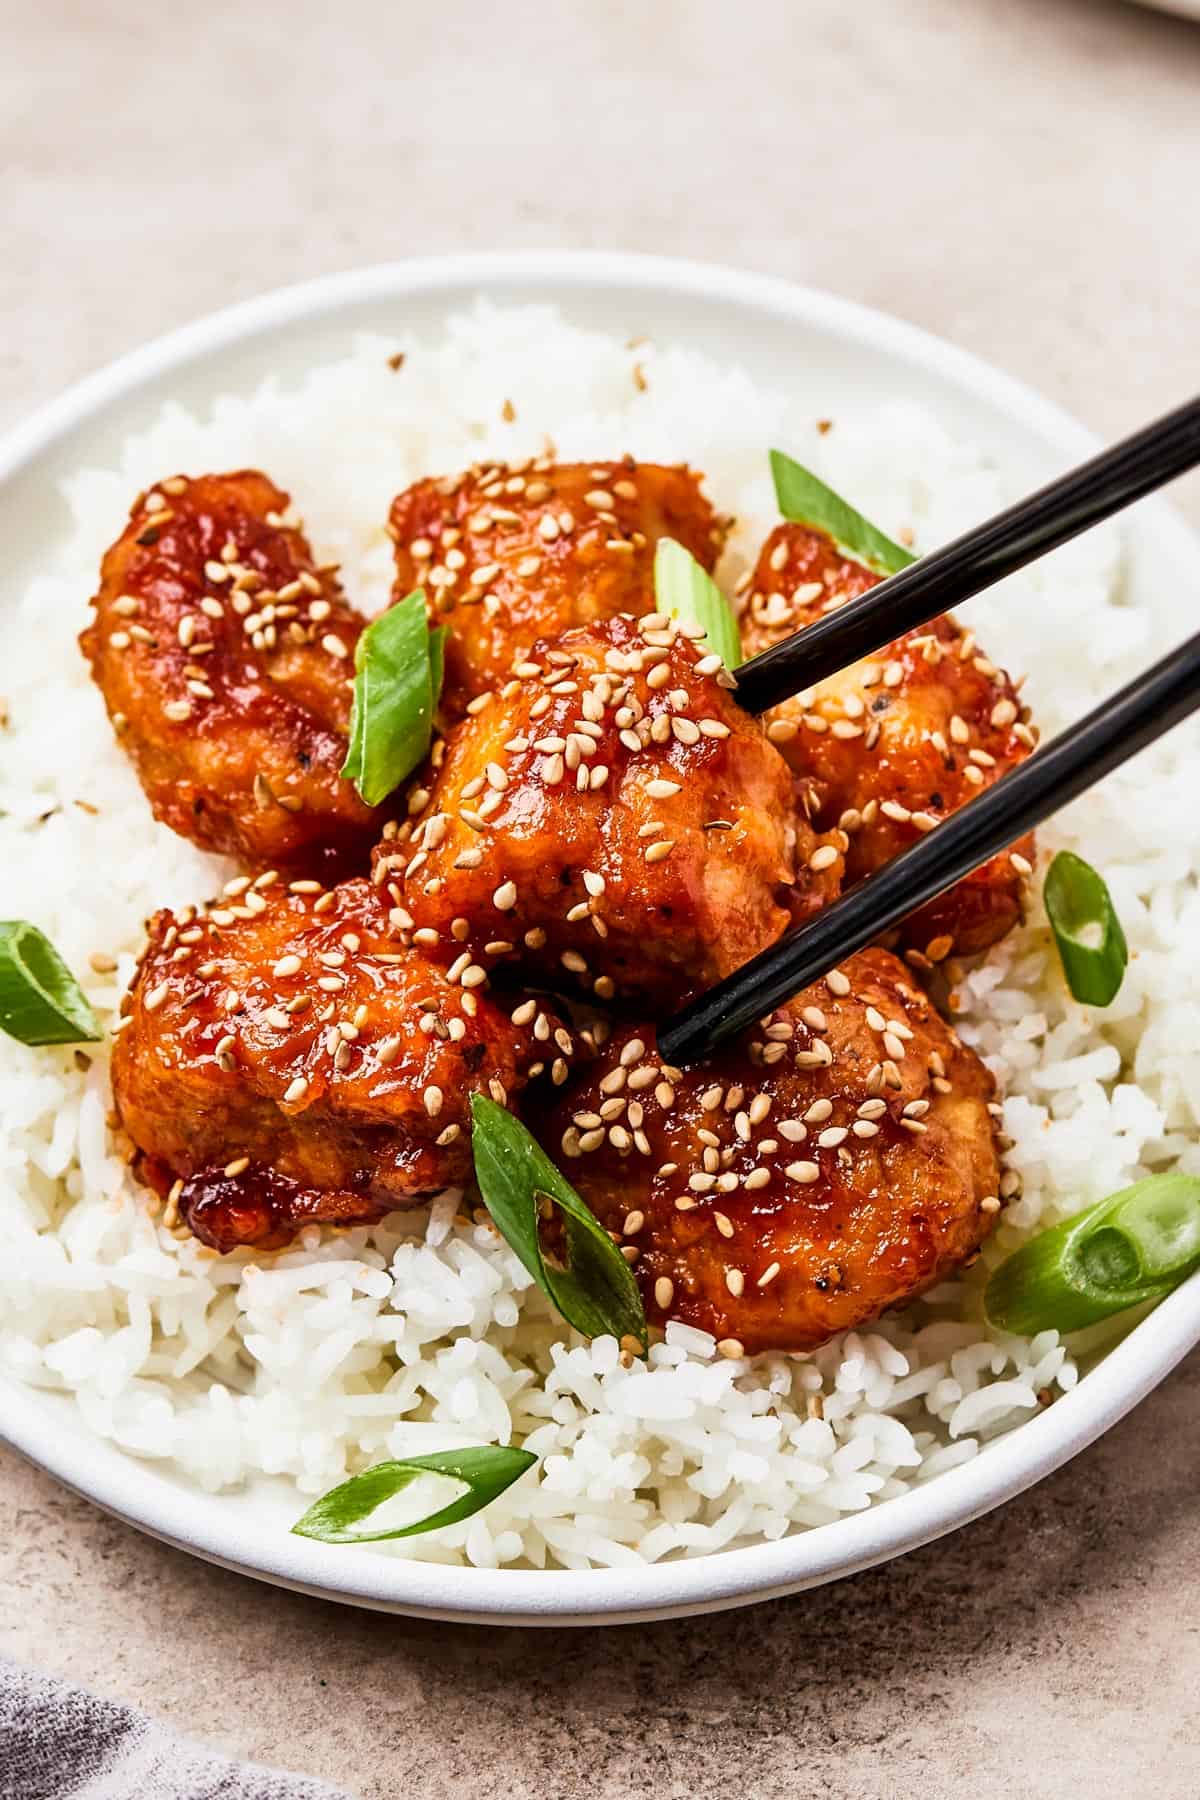 A small plate of takeout-style chicken over rice, with chopsticks holding one piece of chicken.